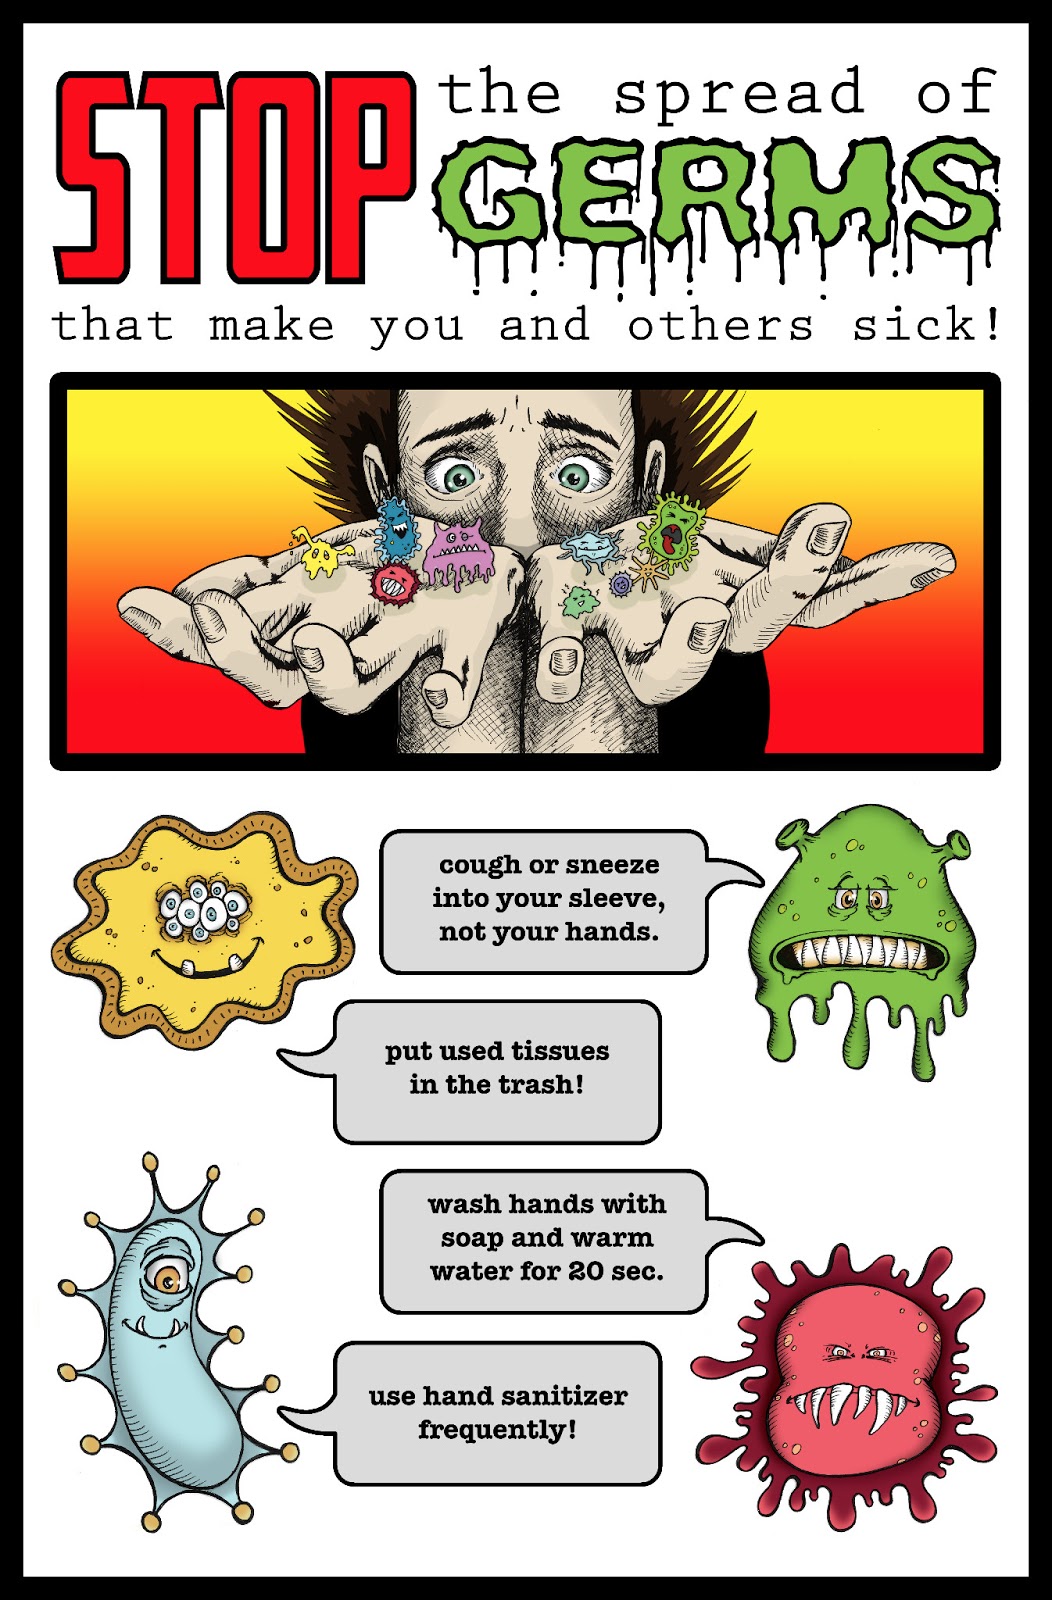 Germs перевод. Face the consequences of Germs. Discovery of Germs was made in. Halt the spread of STH.